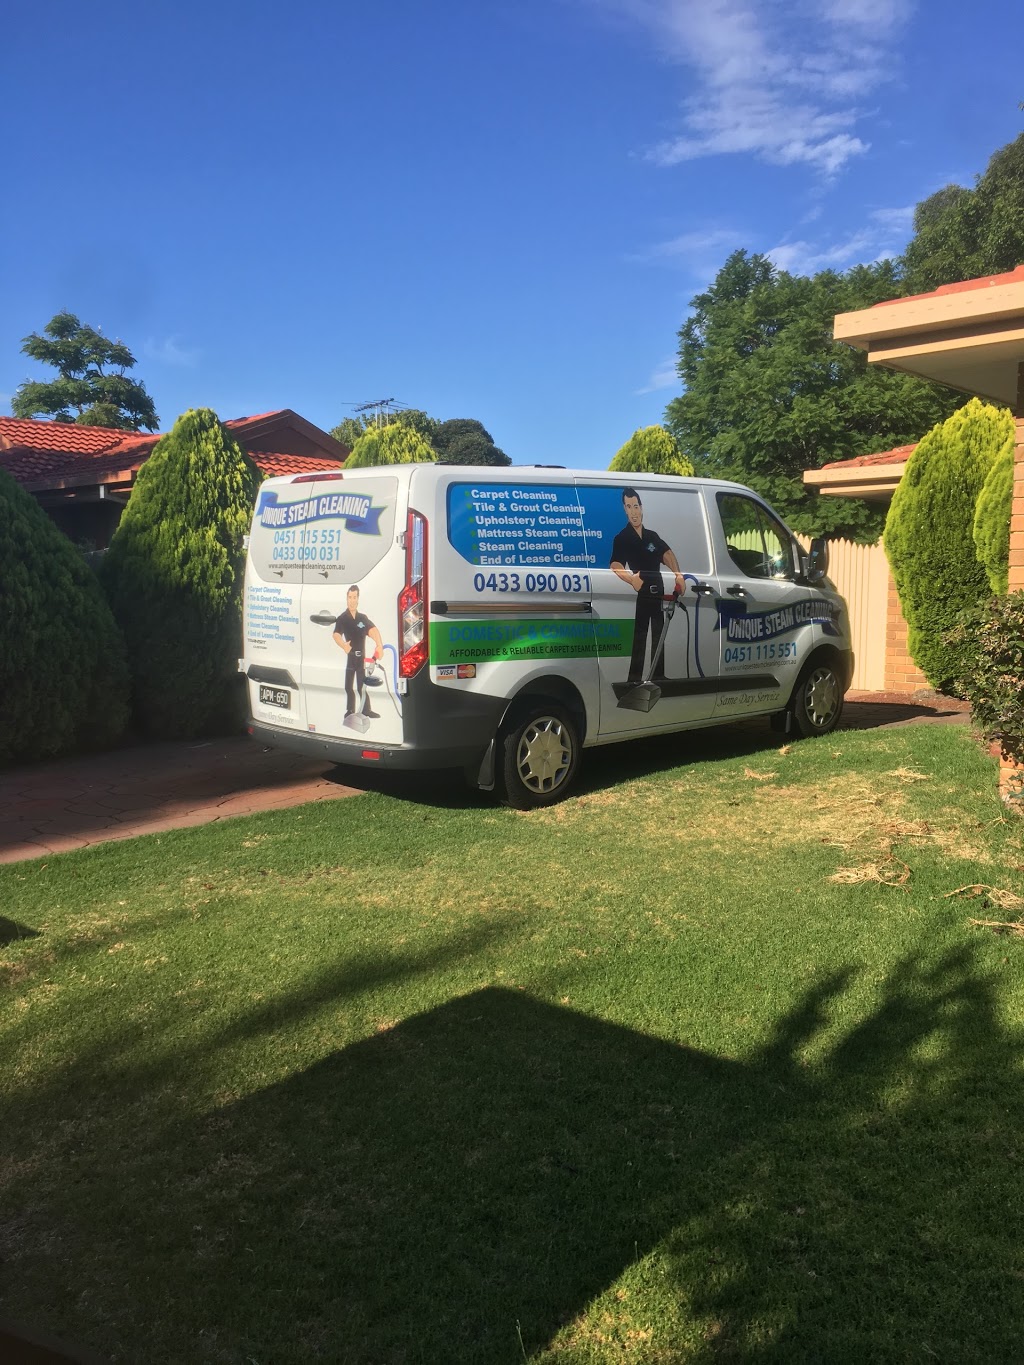 Unique Steam Cleaning - Carpet Cleaning Melbourne | laundry | 3/29 Rothschild Avenue, Glen Huntly, Melbourne VIC 3163, Australia | 0451115551 OR +61 451 115 551